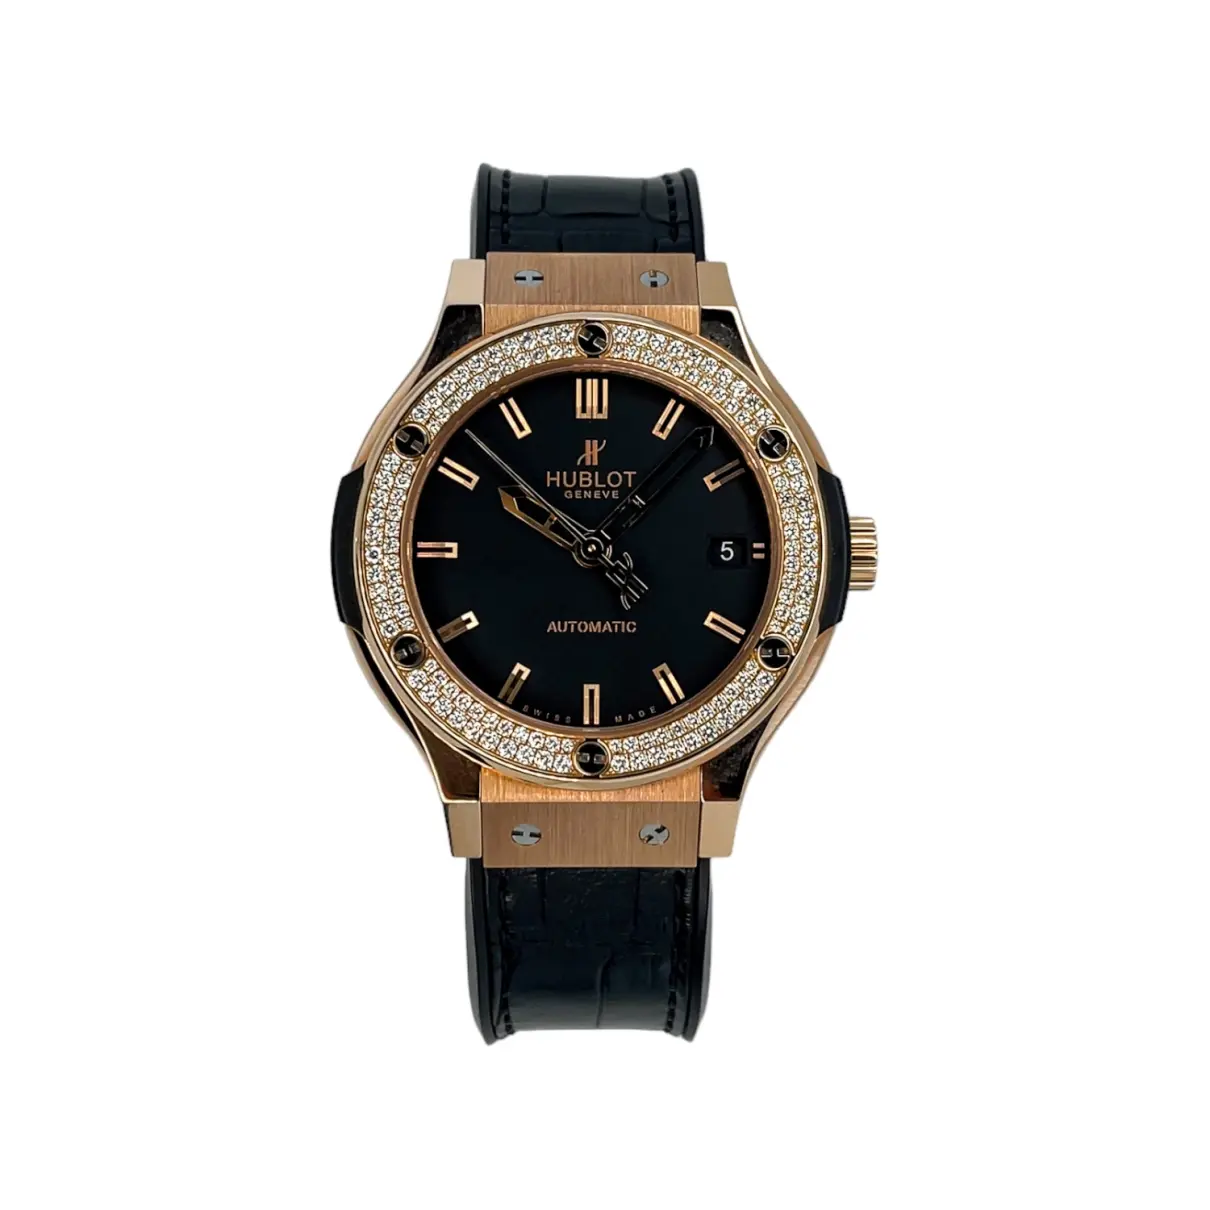 Buy Hublot Classic Fusion pink gold watch online - Vintage